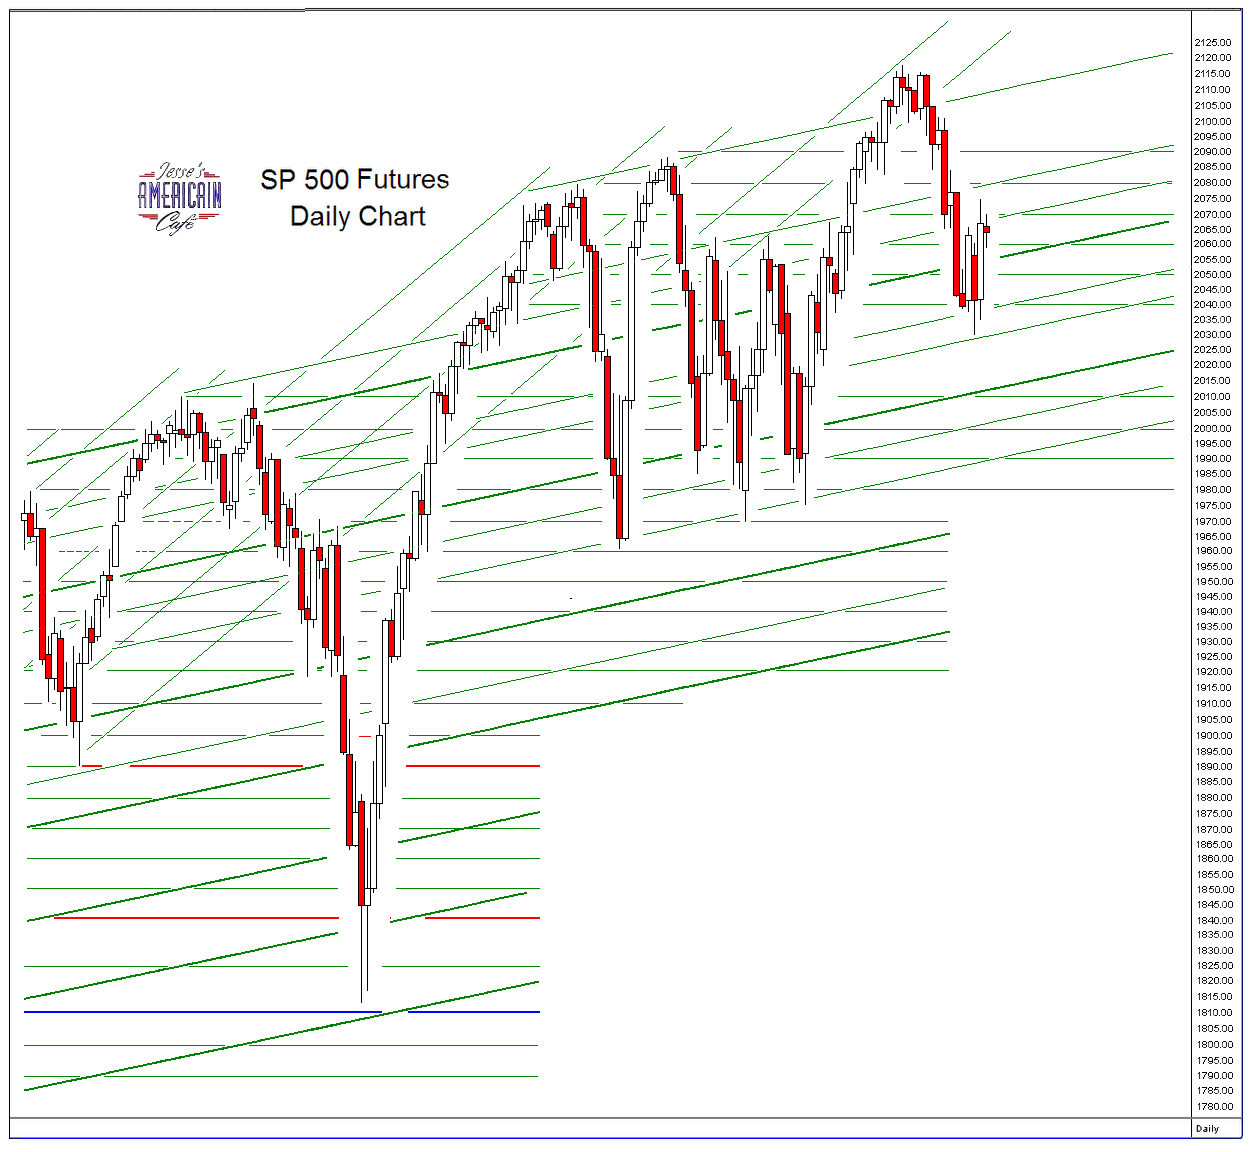 Jesse's Café Américain: SP 500 and NDX Futures Daily Charts - A Swing and a Miss